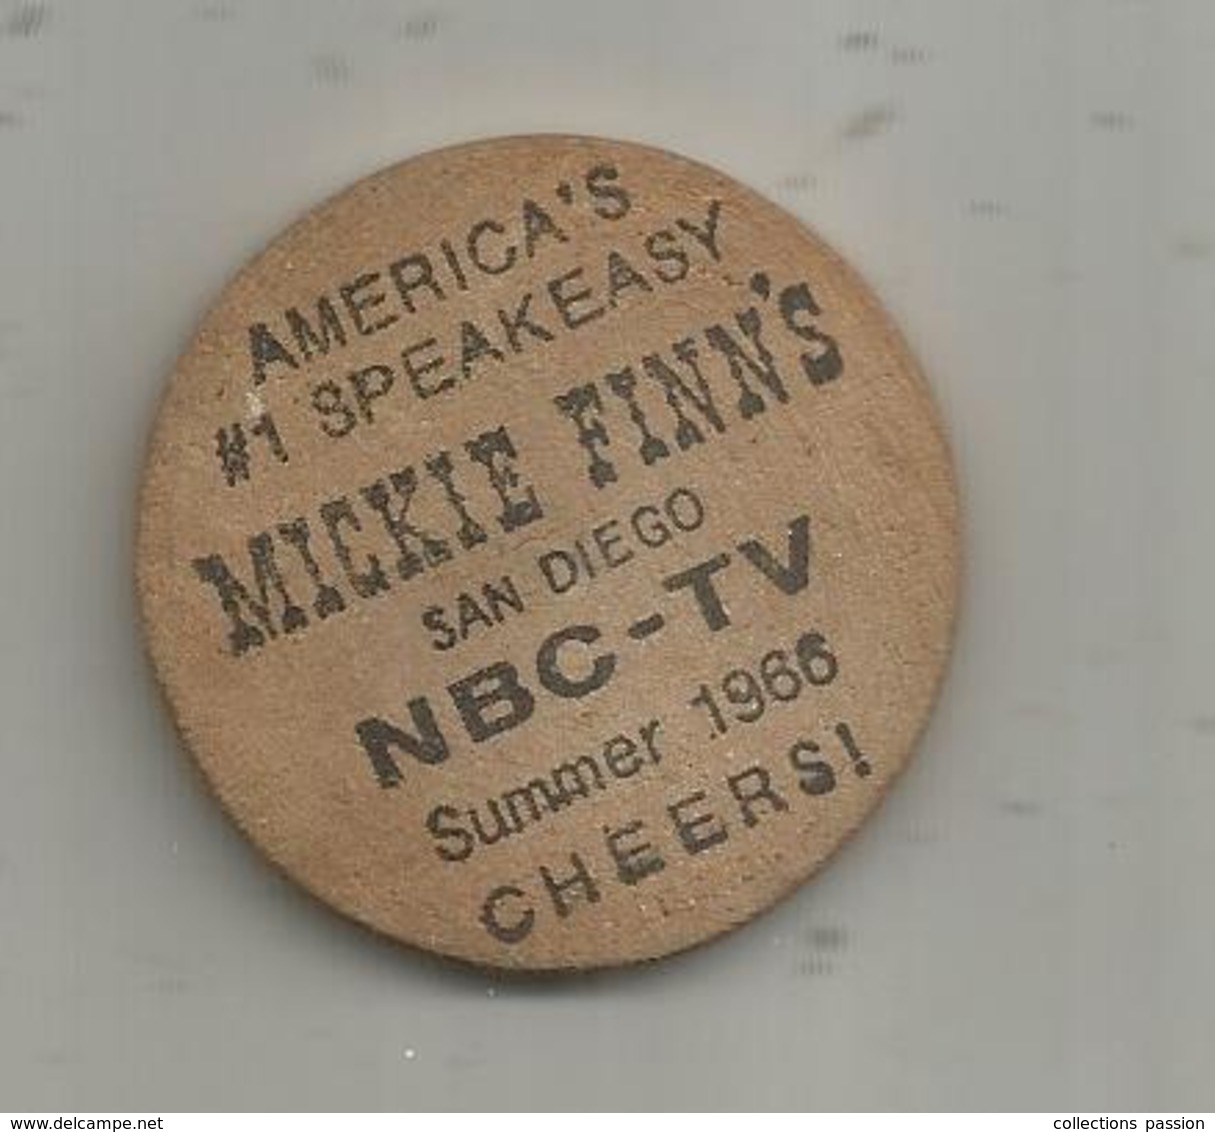 Jeton , Bois , One WOODEN NICKEL , United States Of America , 5 C , Mickie Finn's , SAN DIEGO , NBC-TV ,summer 1965 - Professionals/Firms